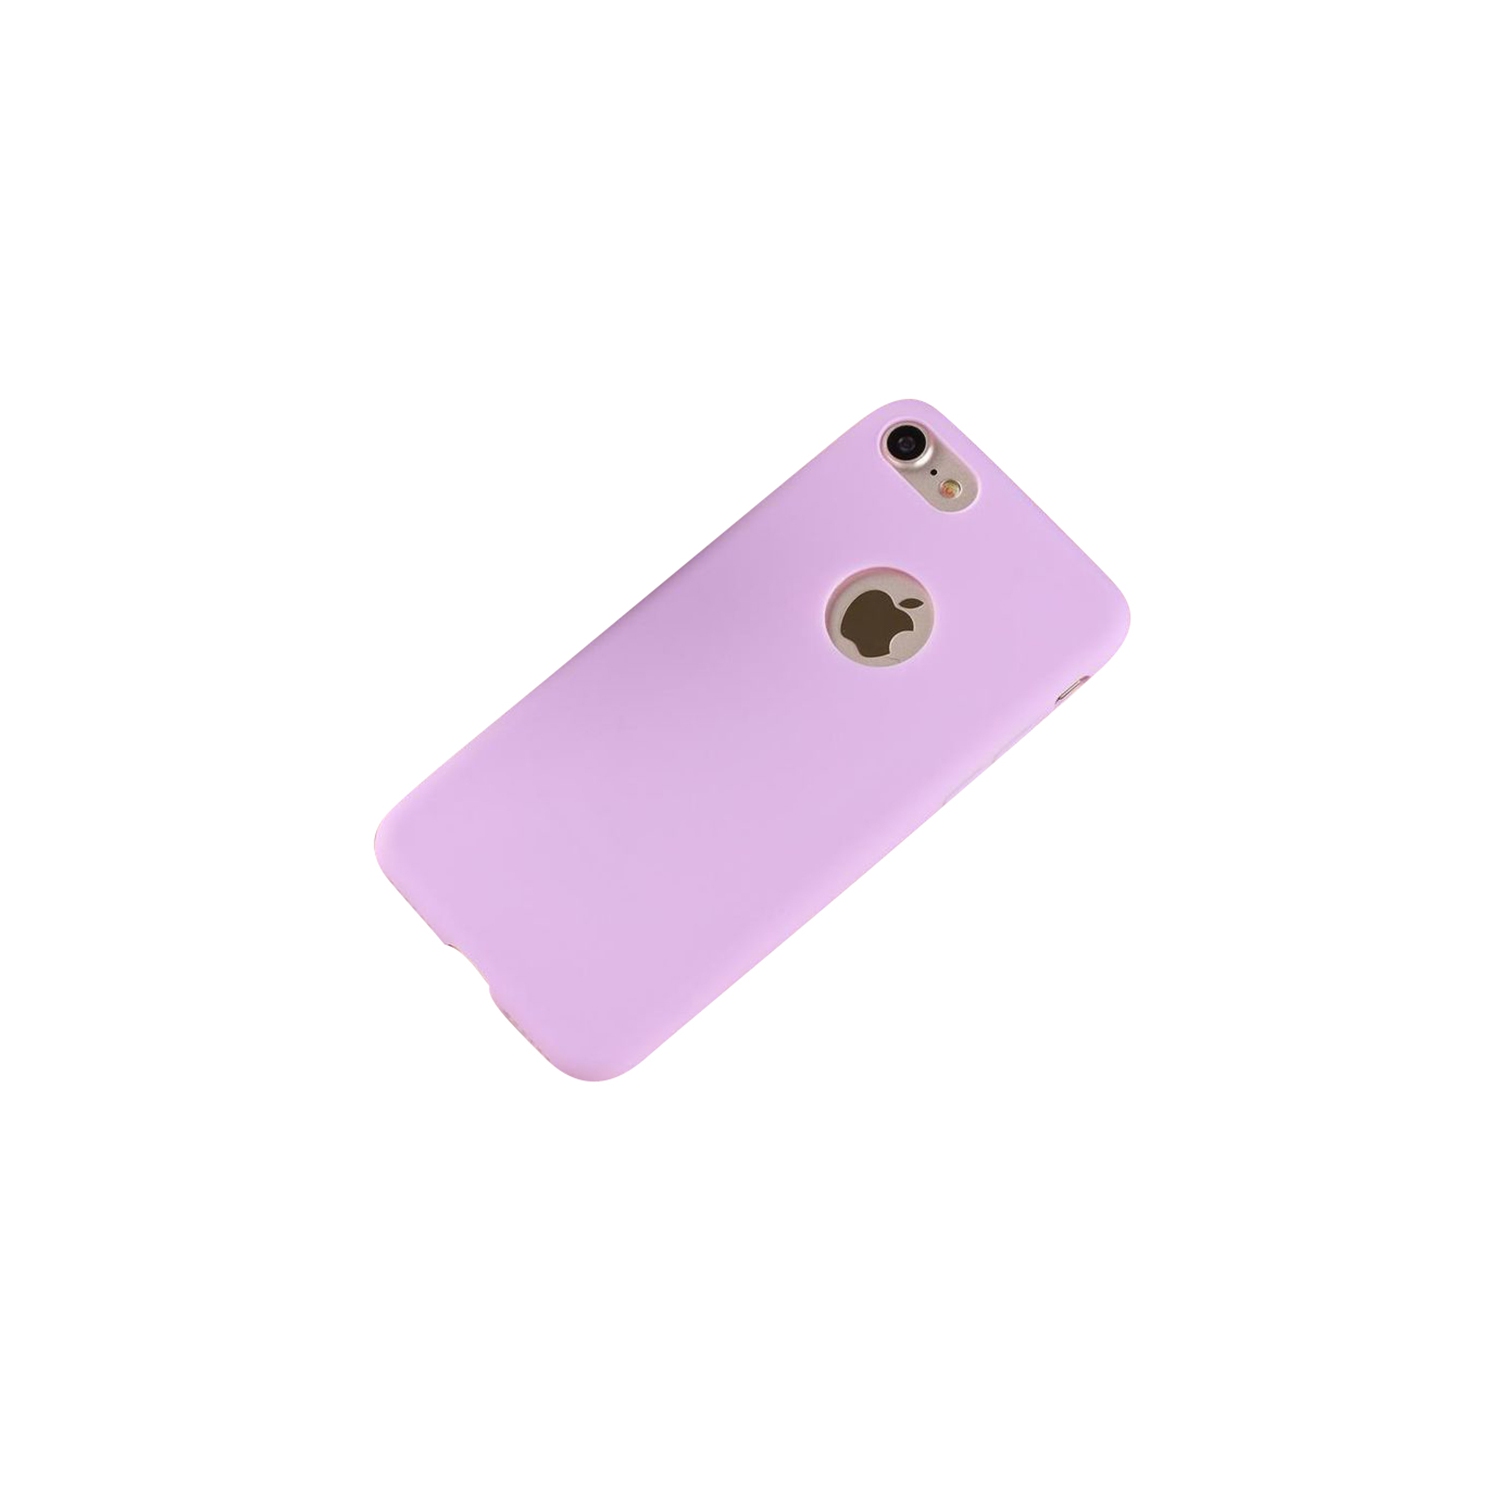 Ultra Thin Solid Matte Candy Color Silicon TPU Soft Phone Case For iPhone 7 / iPhone 8 / iPhone SE (2020) 4.7 - Purple